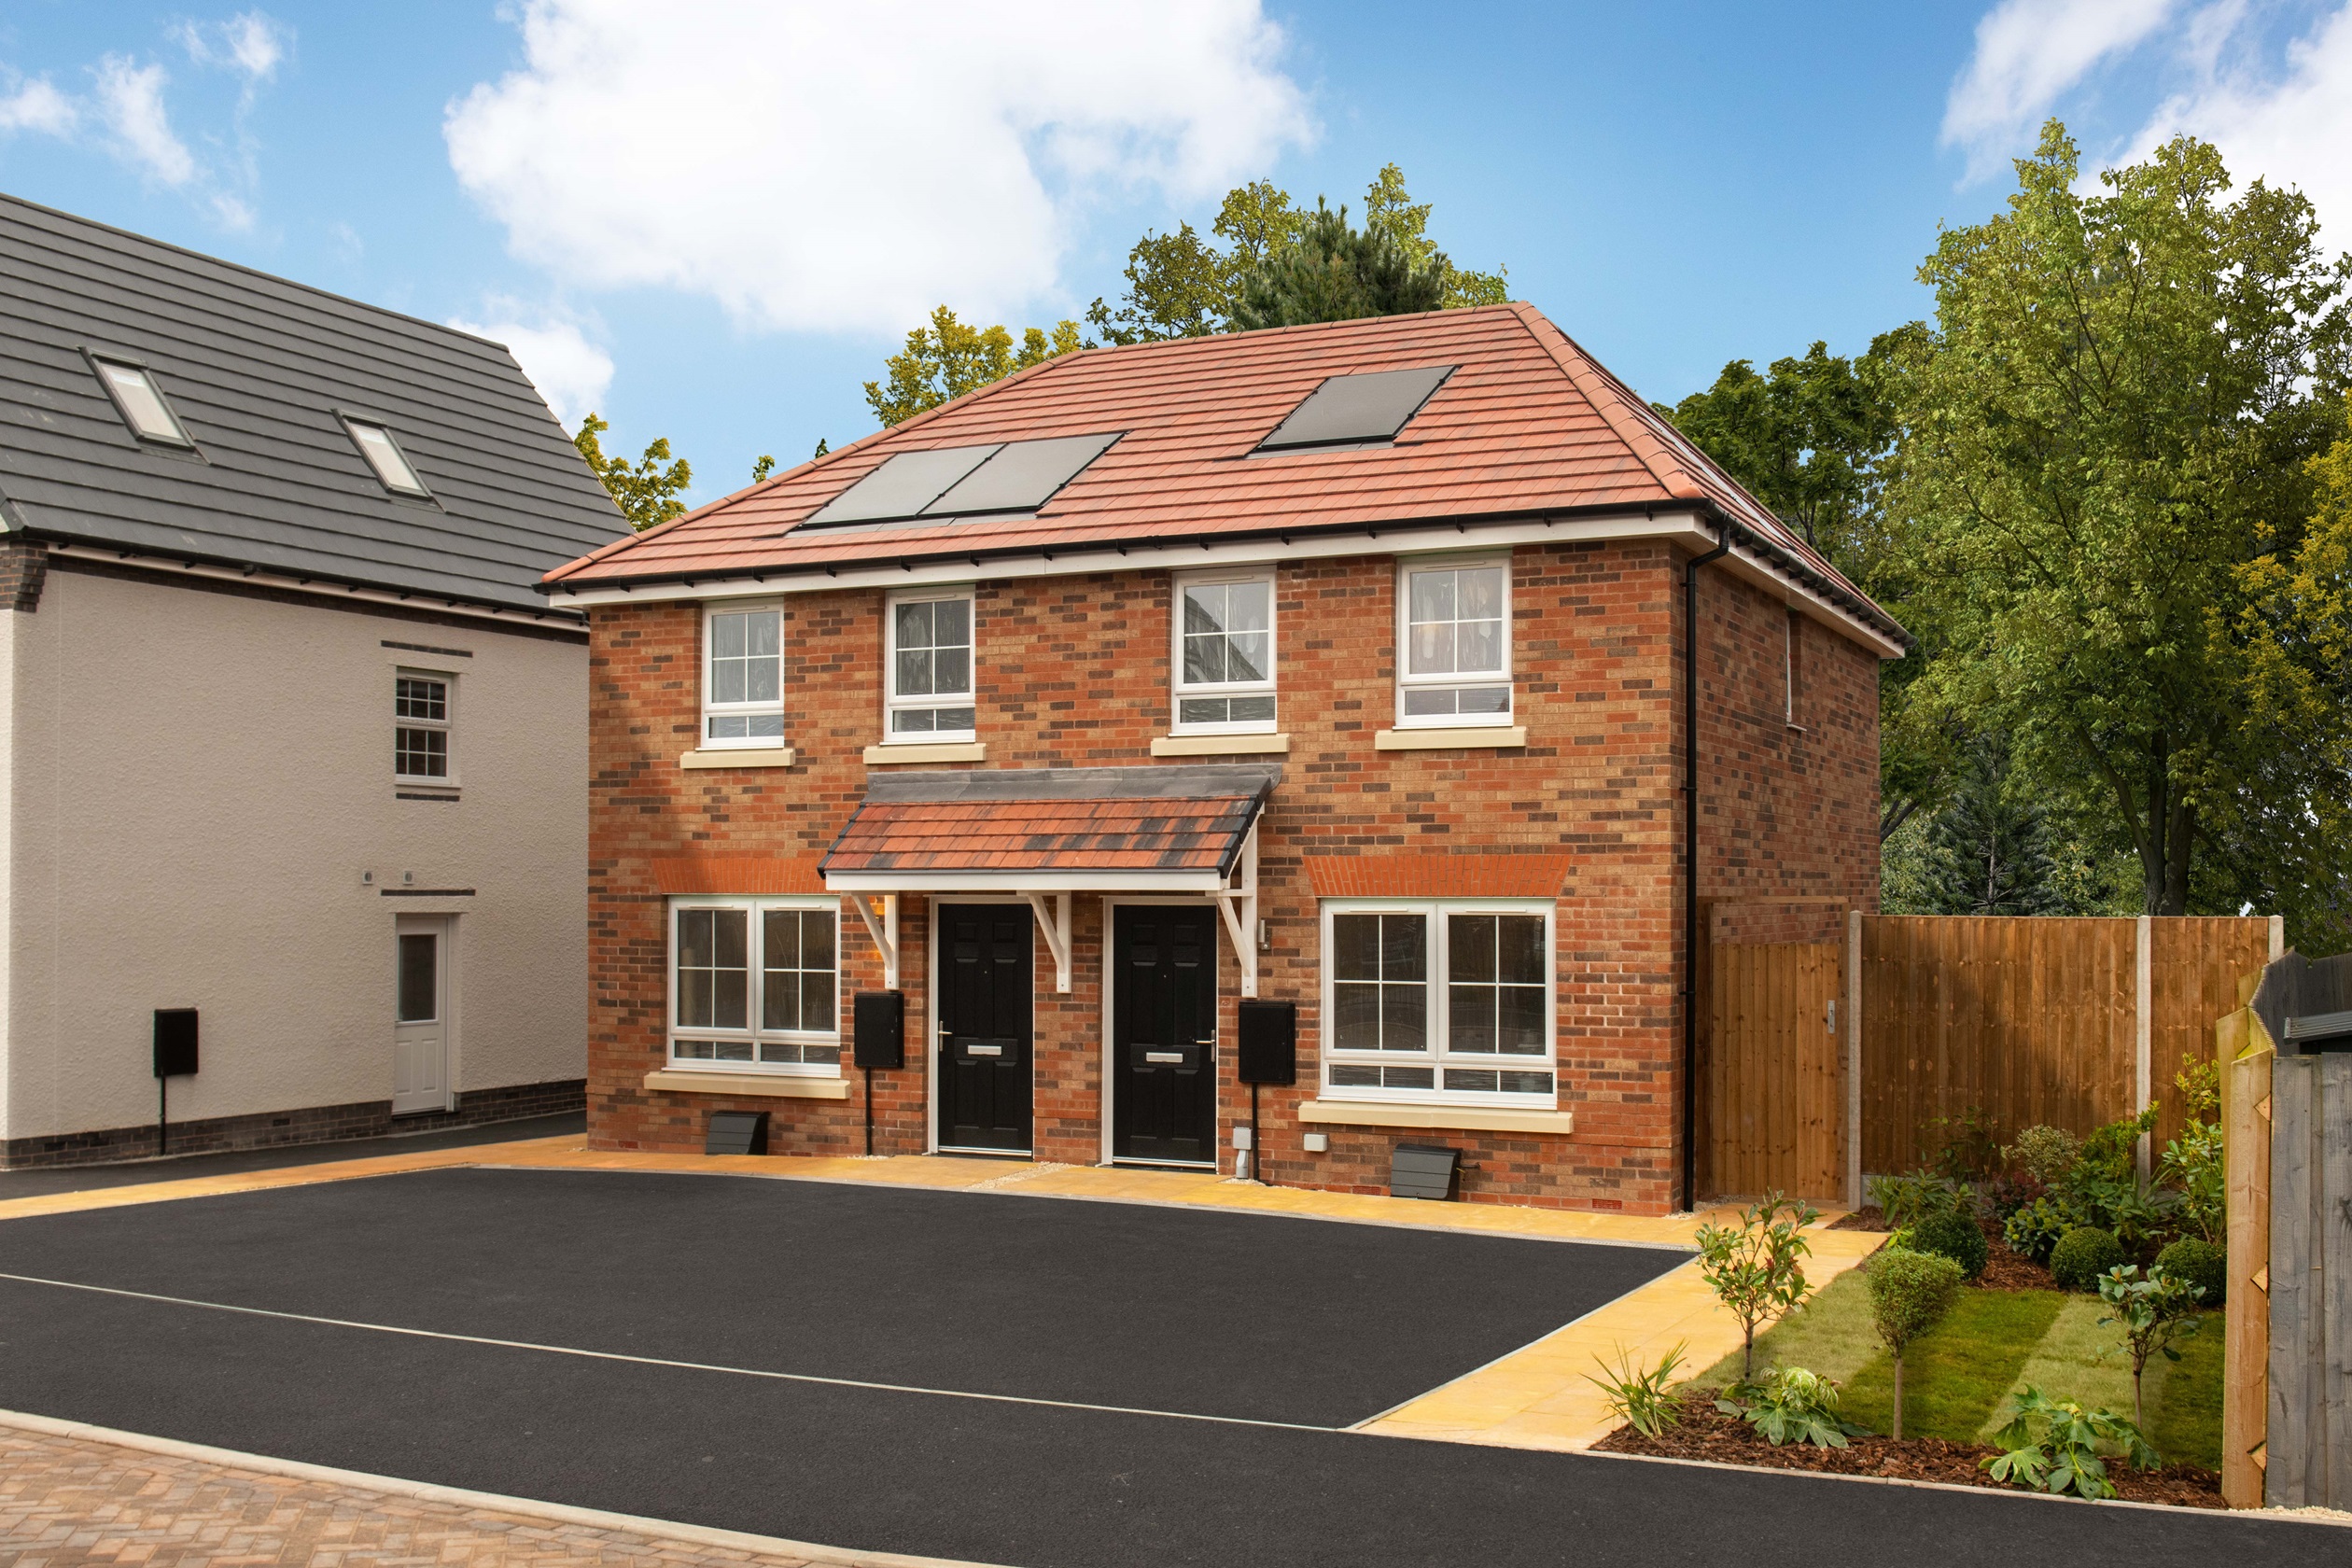 Property 2 of 9. Semi-Detached Brick Archford Homes At The Damsons